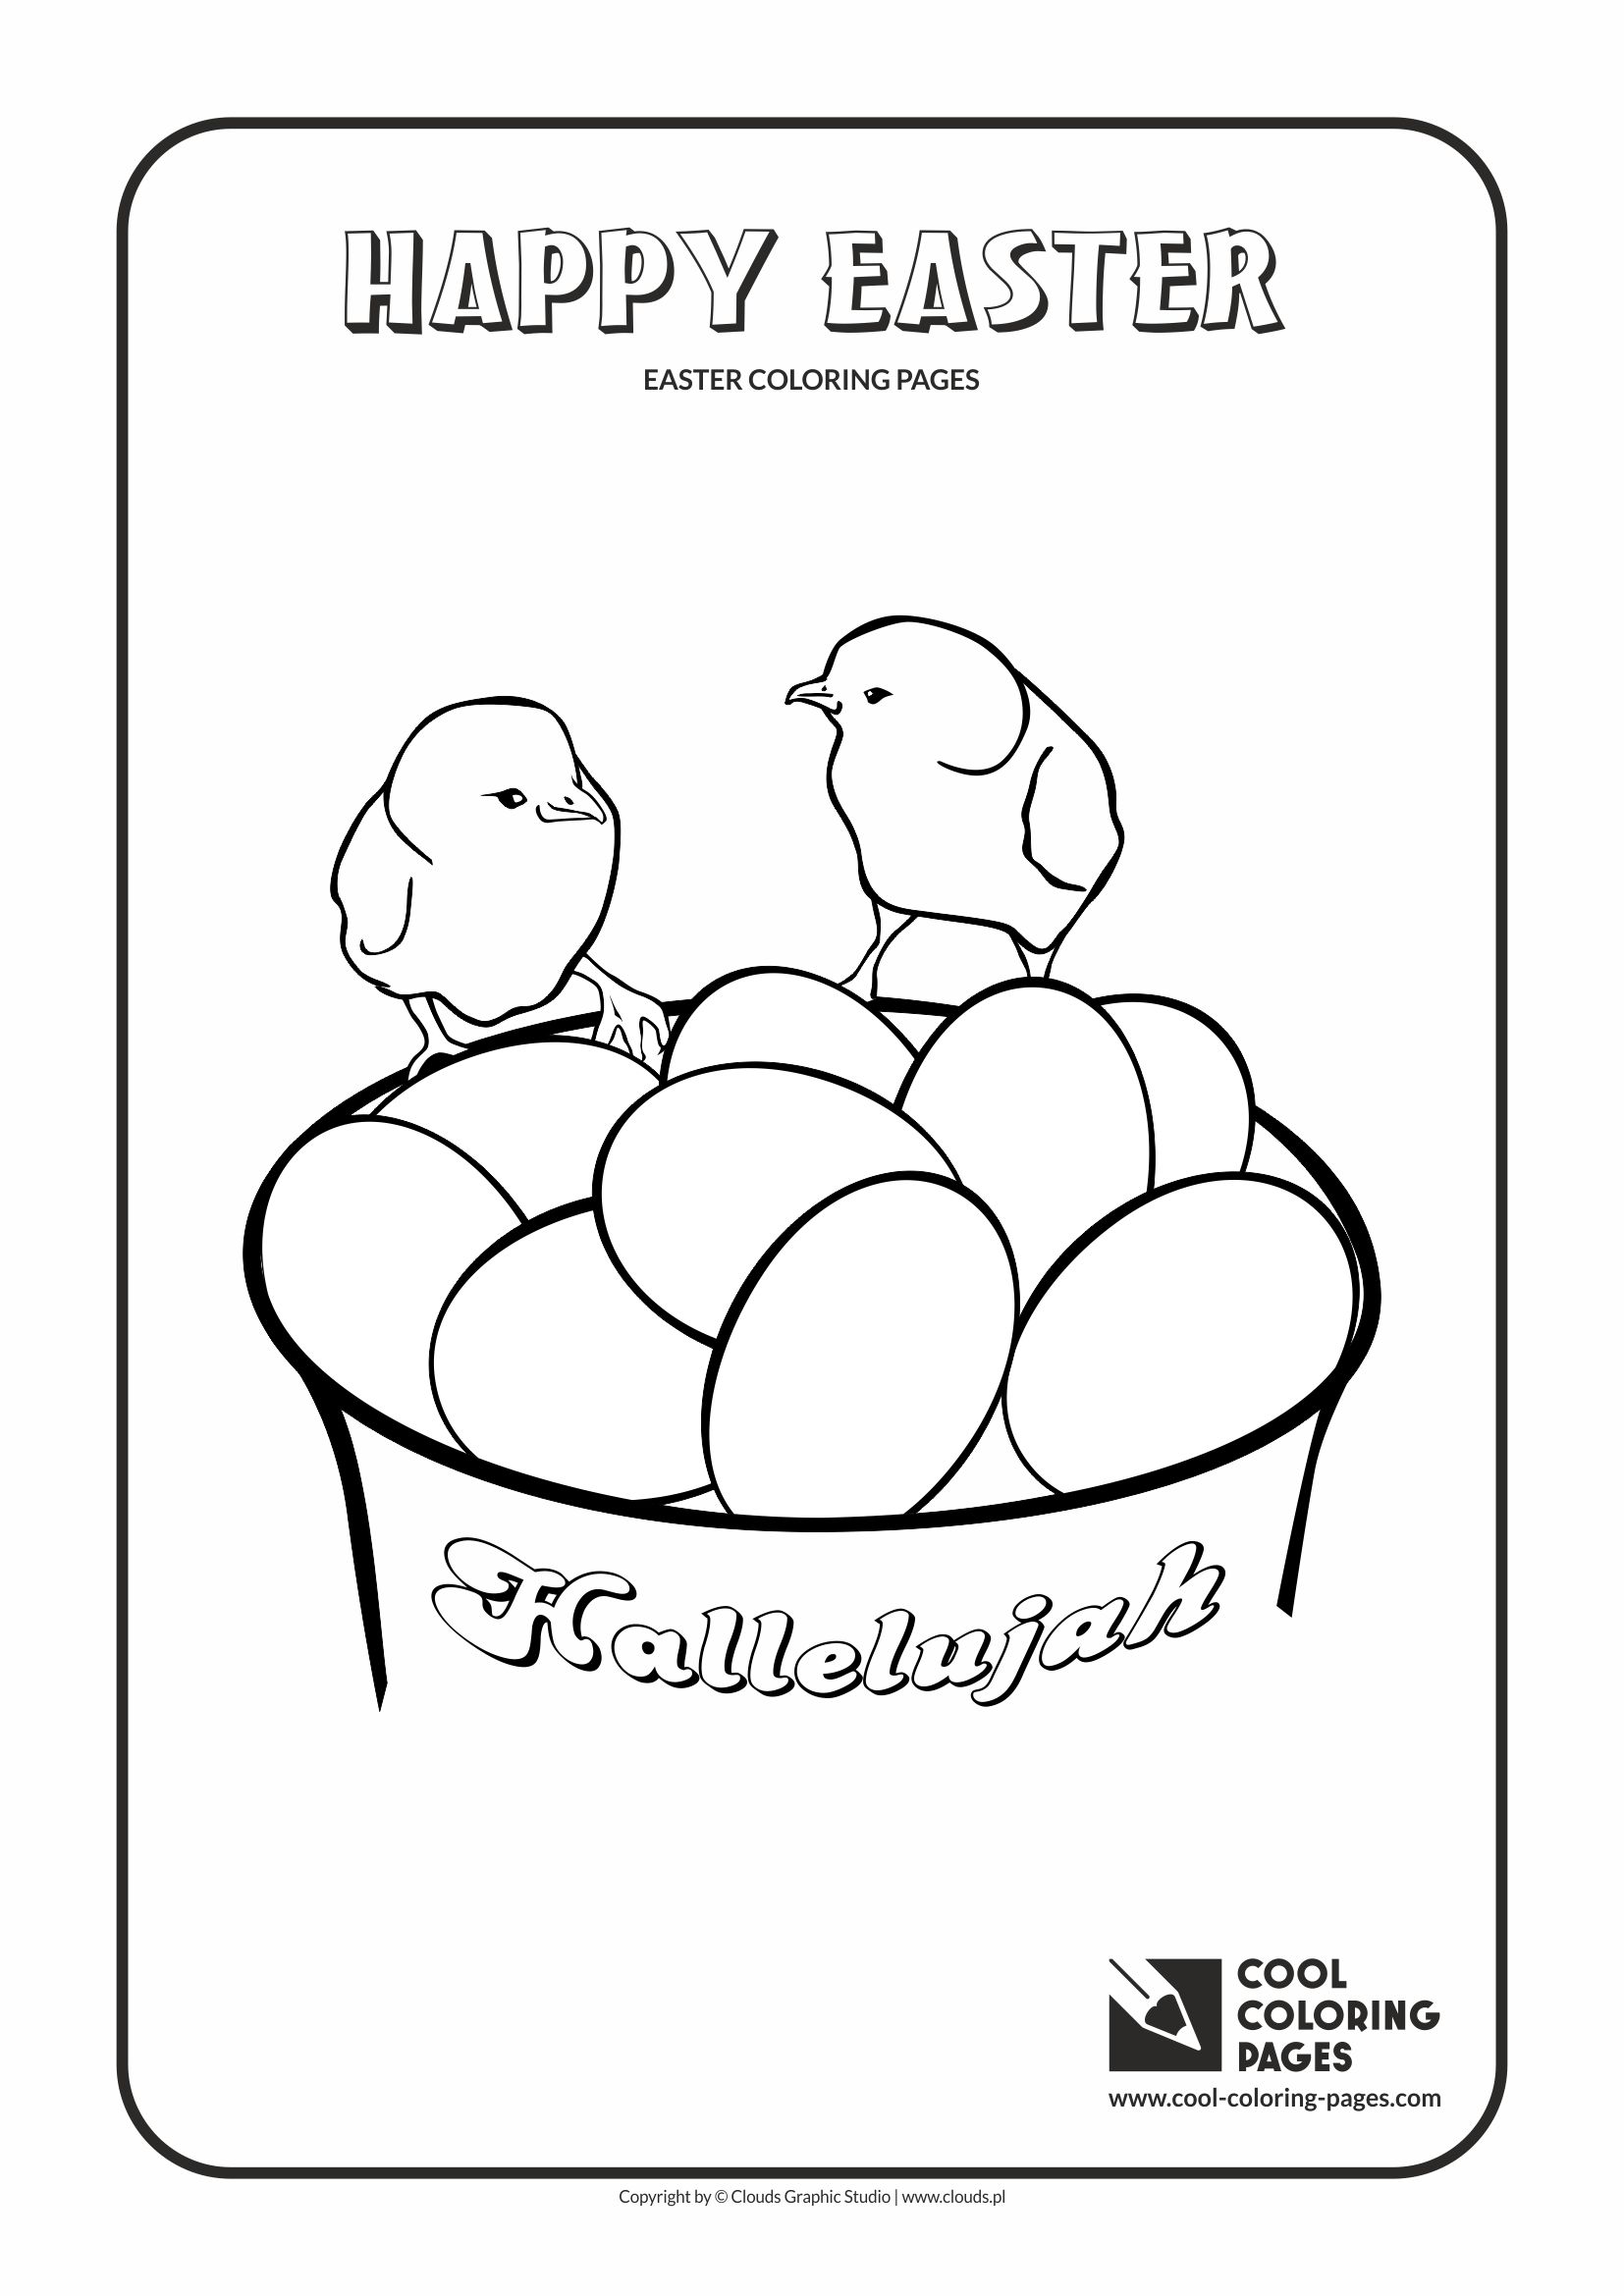 Download Cool Coloring Pages Easter coloring pages - Cool Coloring Pages | Free educational coloring ...